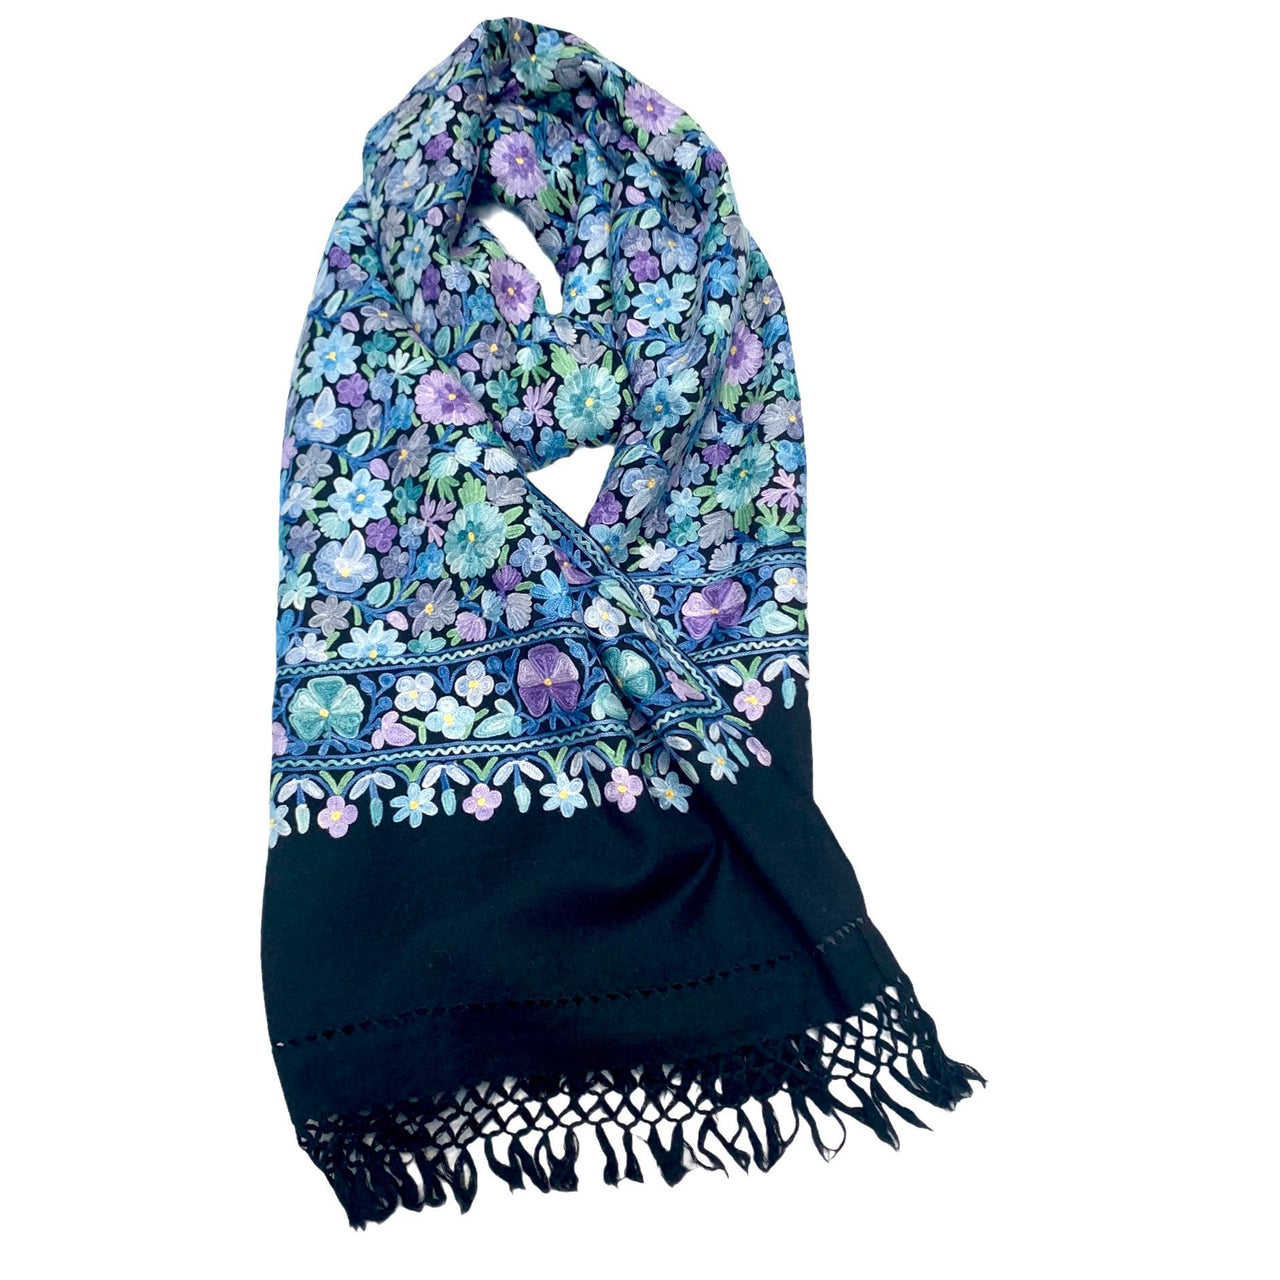 Black Embroidered Multi-Colored Floral  Scarf/Shawl/wrap/Stole